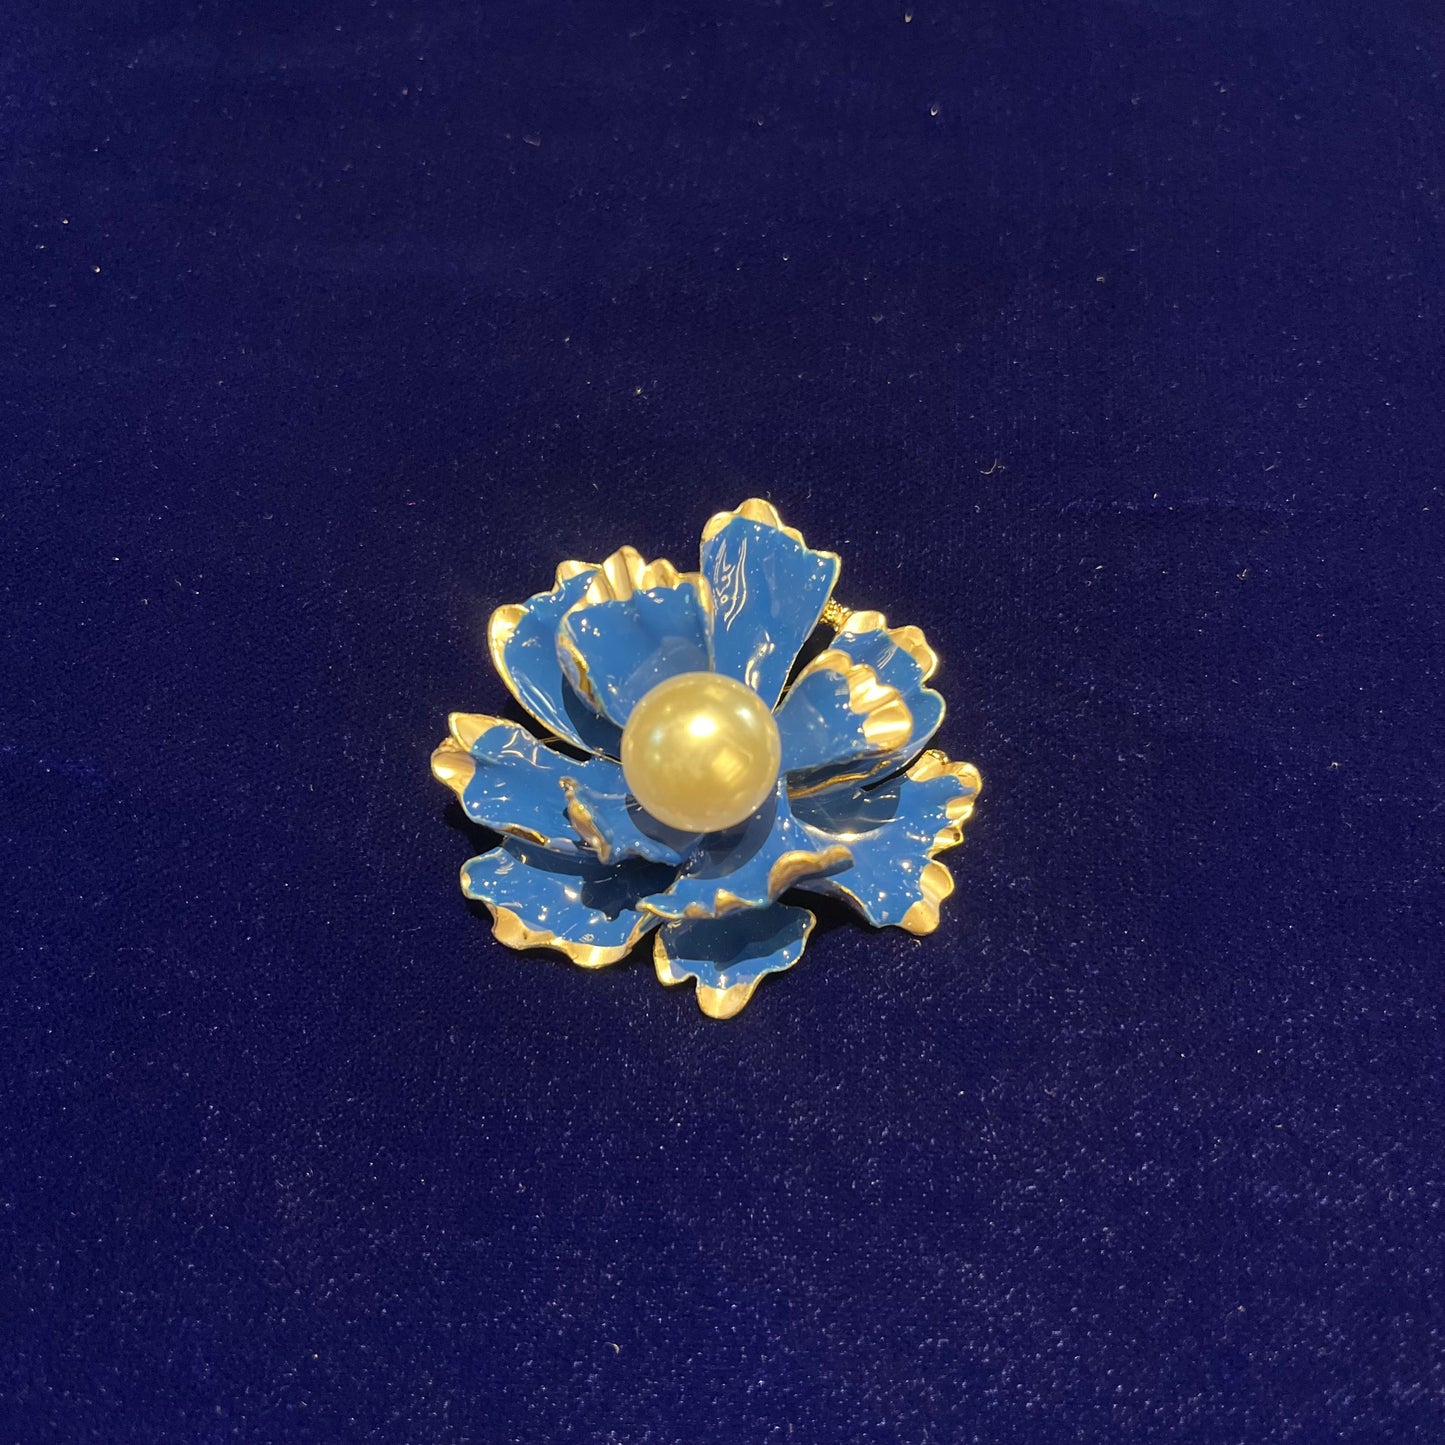 LOLstudio Blue Pearl Flower Brooch Pin for Wedding, Engagement, Anniversary or Mother's Day, BlueLOLB190